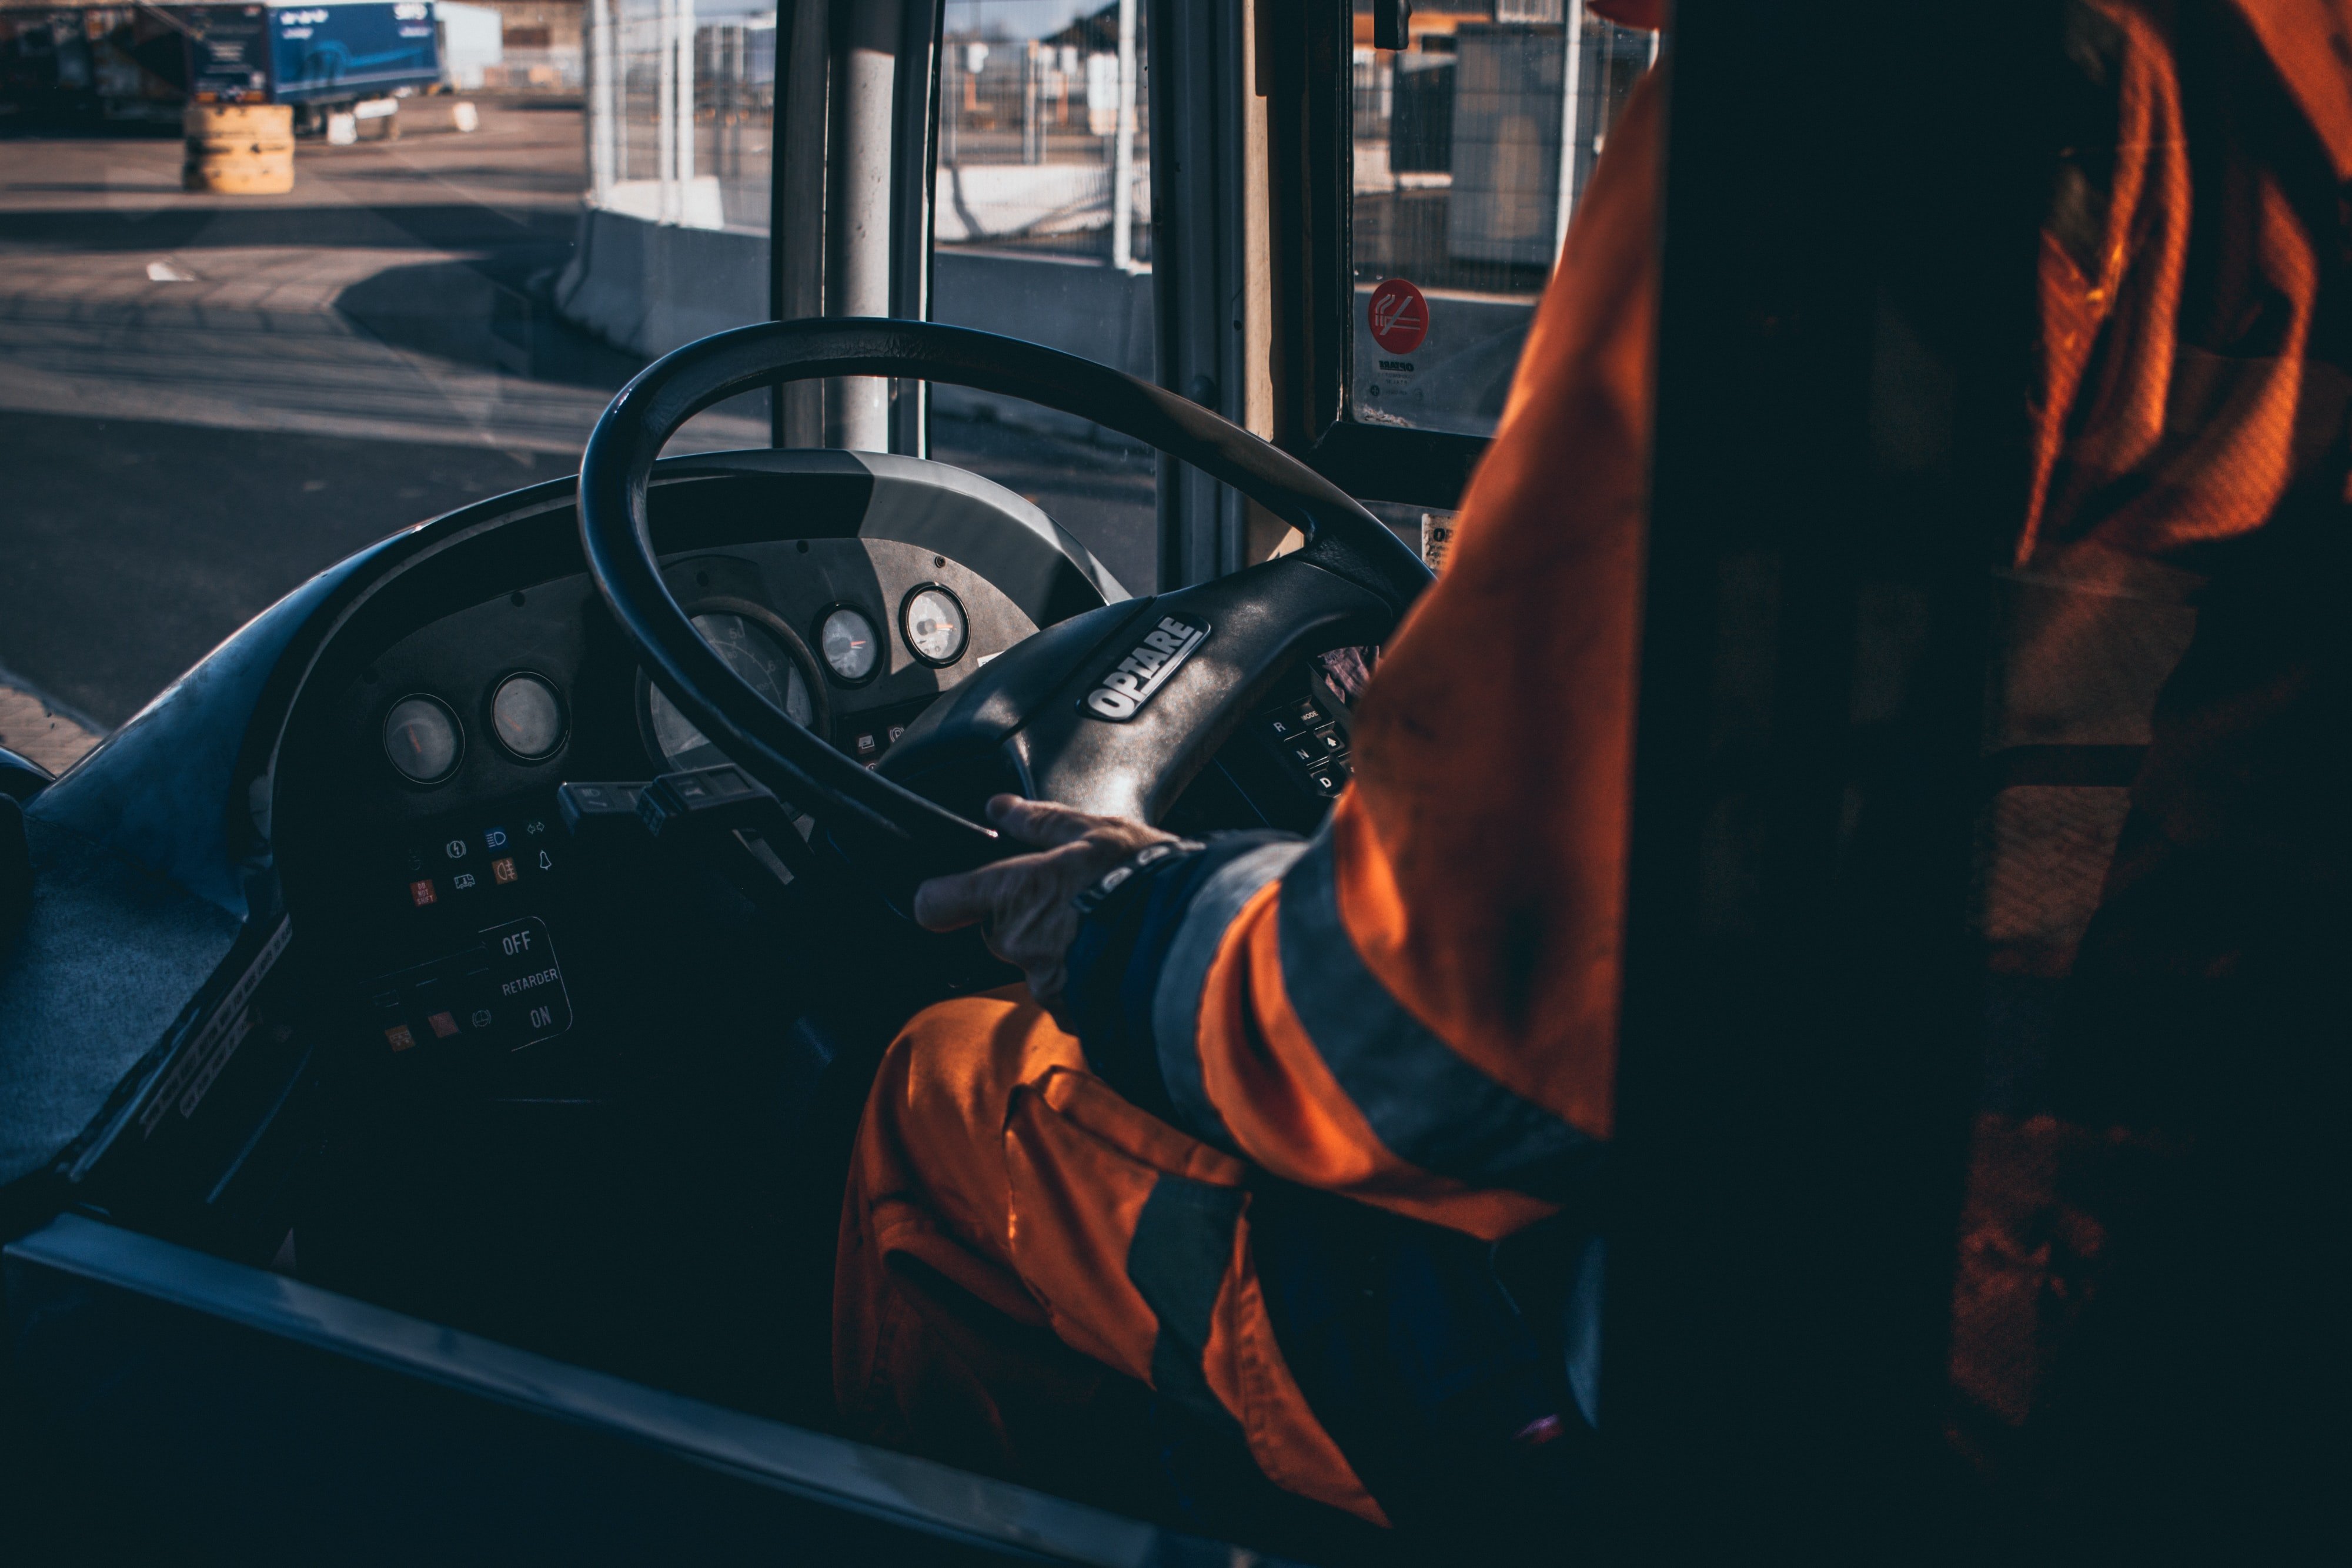 People on Reddit applauded OP for making the bus driver rethink his position & jump in her favor. | Source: Unsplash